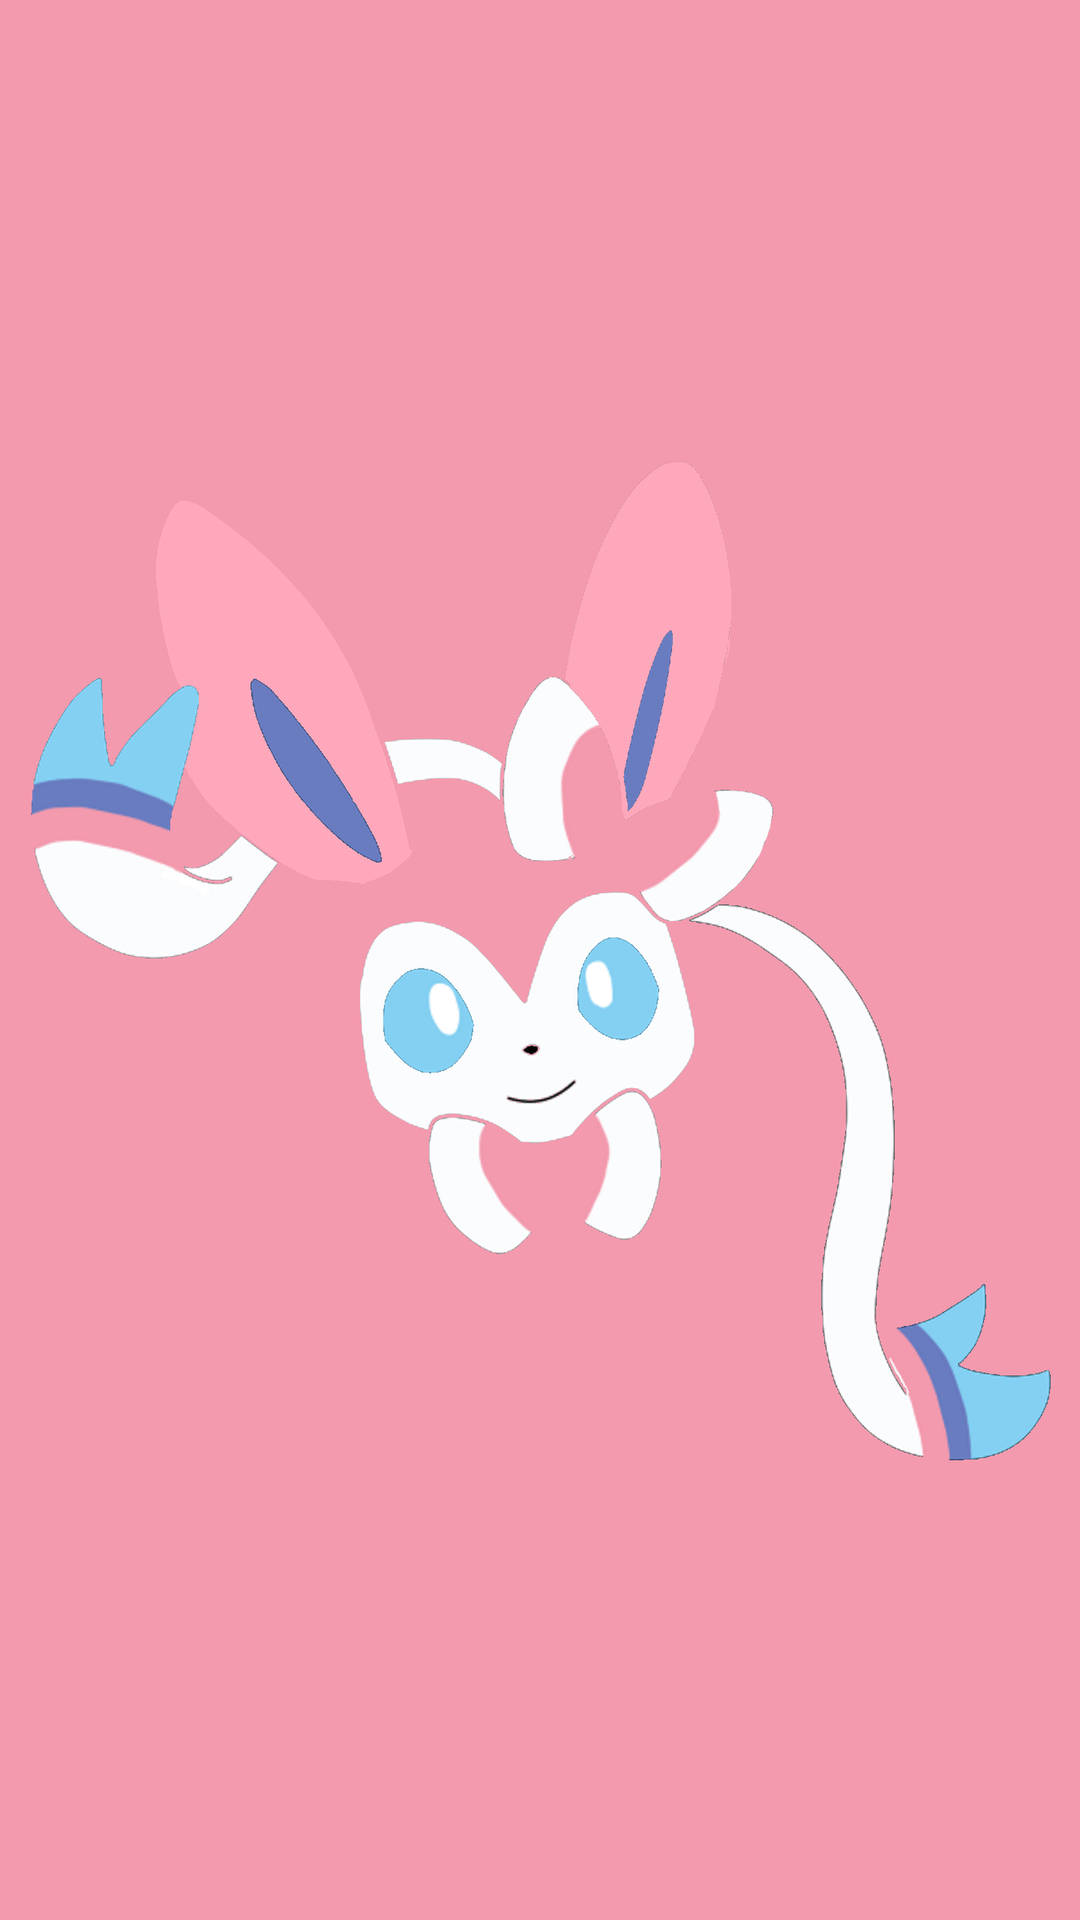 Take A Look At This Adorable Sylveon! Background